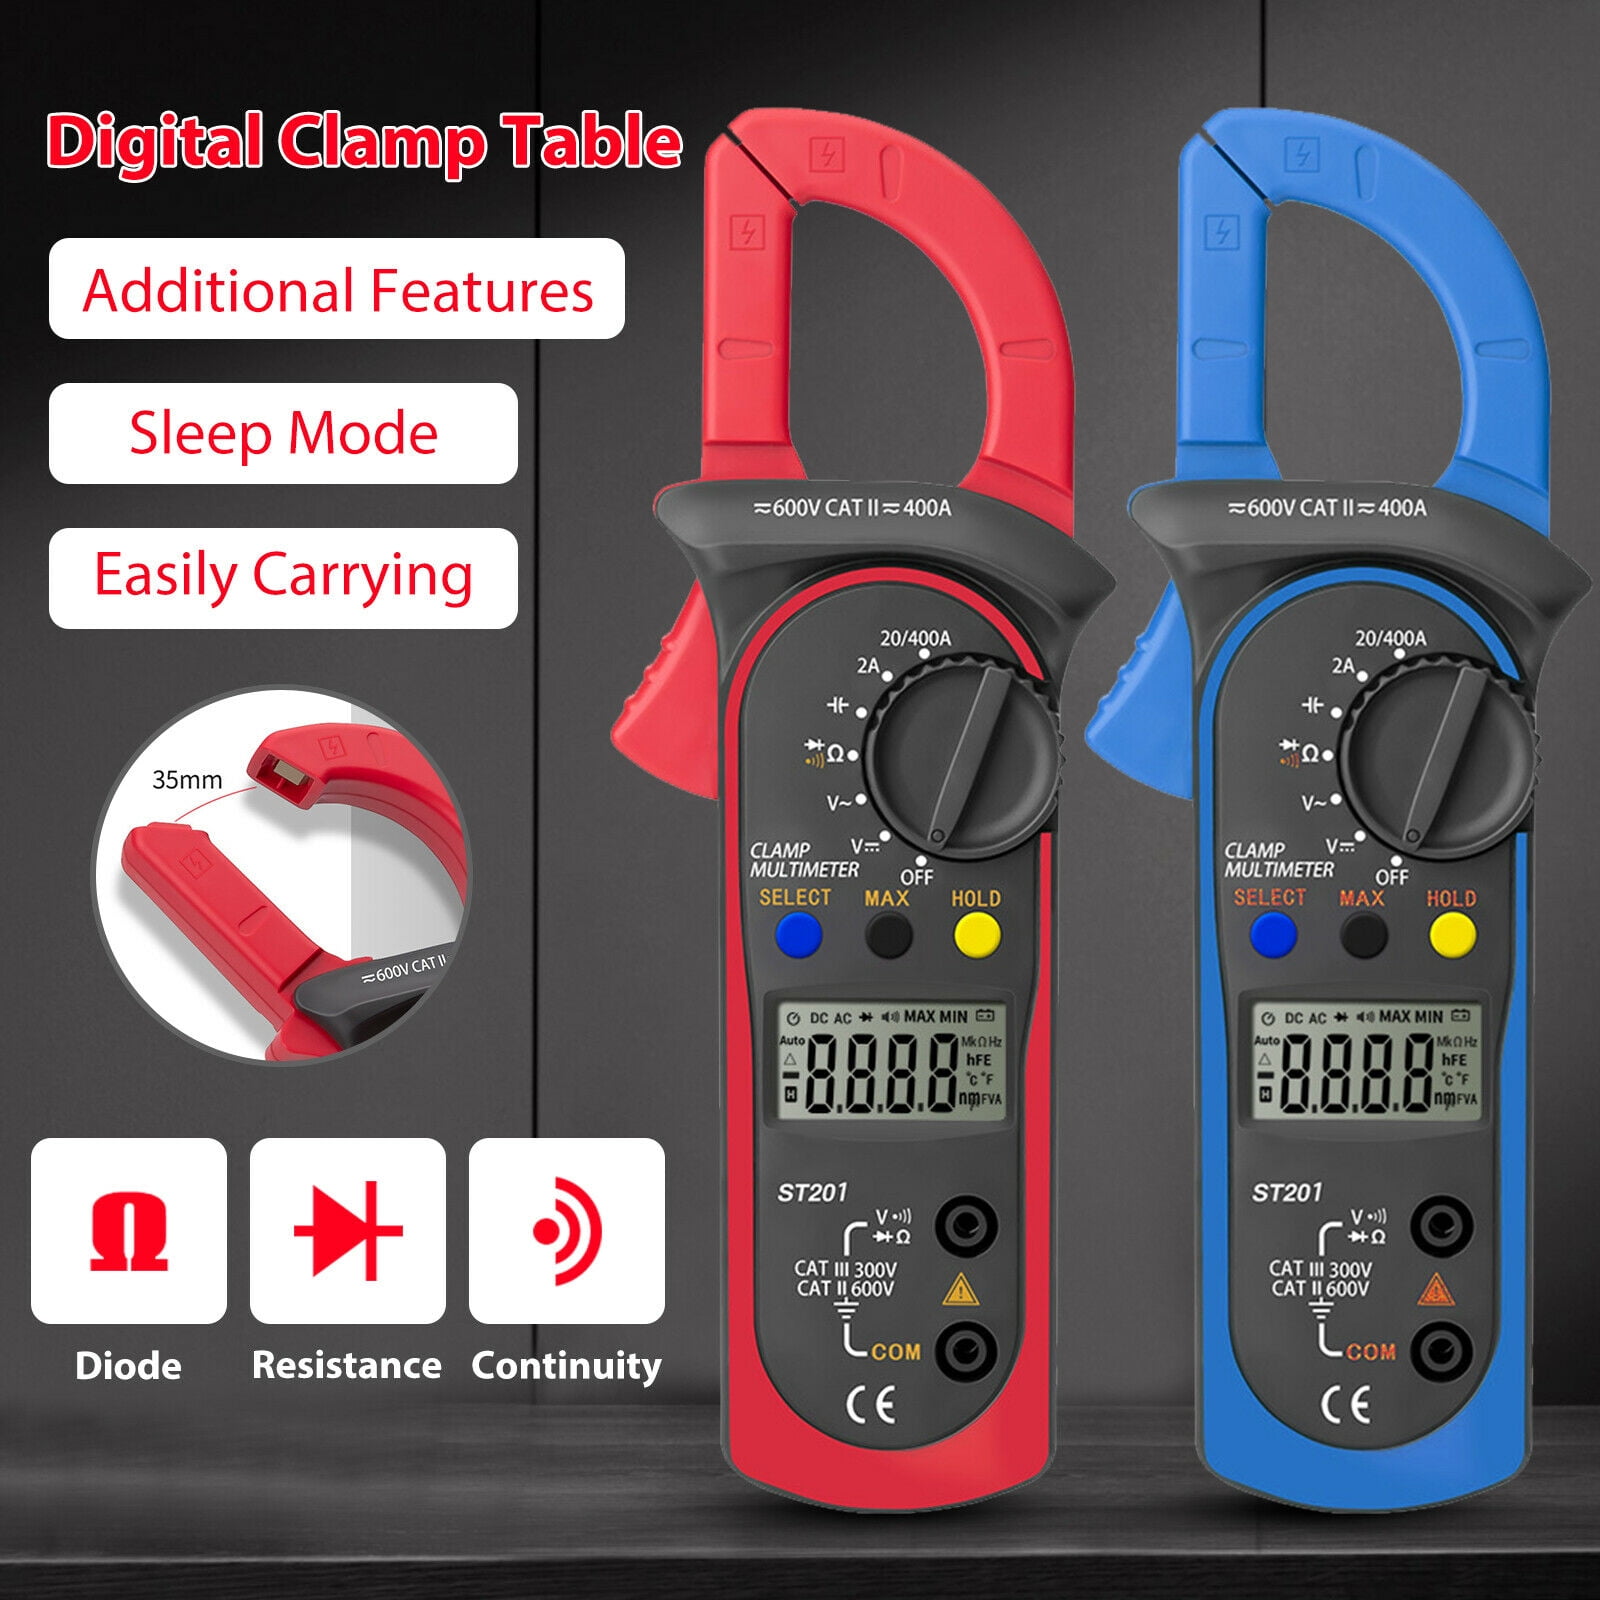 Continuity; Tests Diodes Resistance Multimeter Volt Meter with Auto Ranging; Measures Voltage Tester AC Current Red/Black Digital Clamp Meter